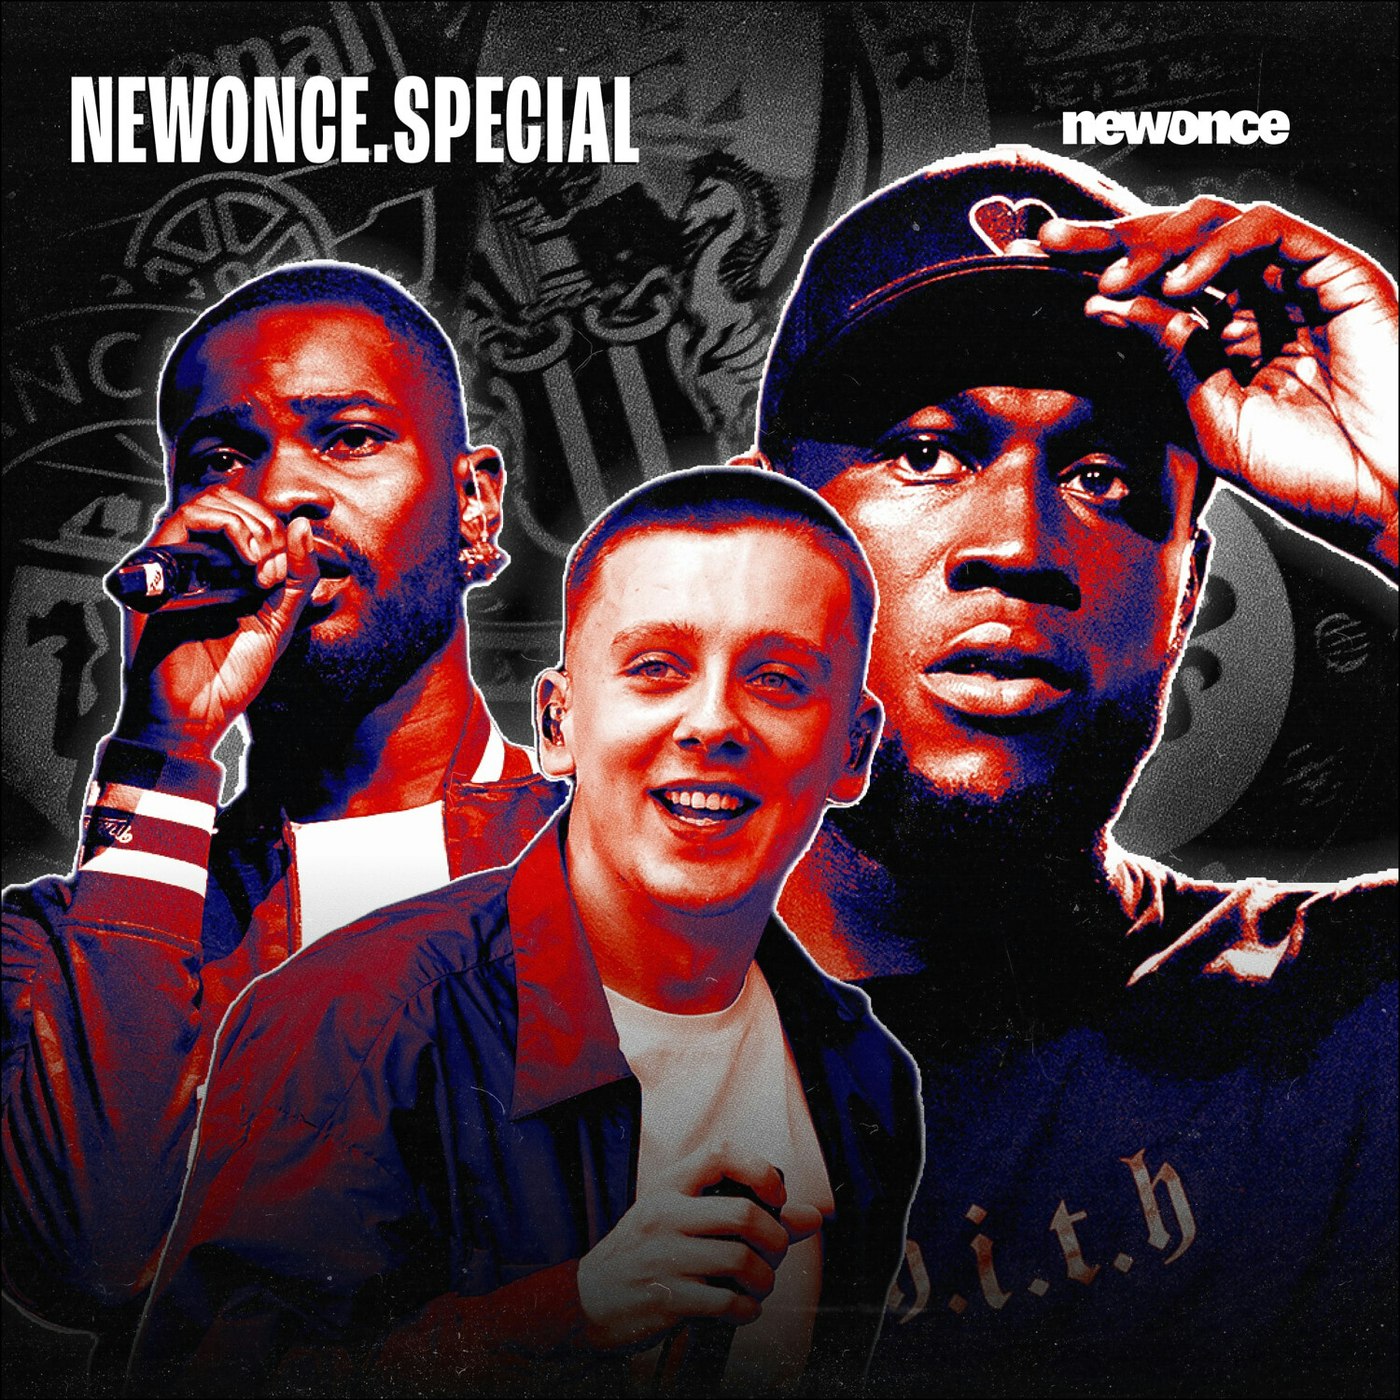 newonce specials